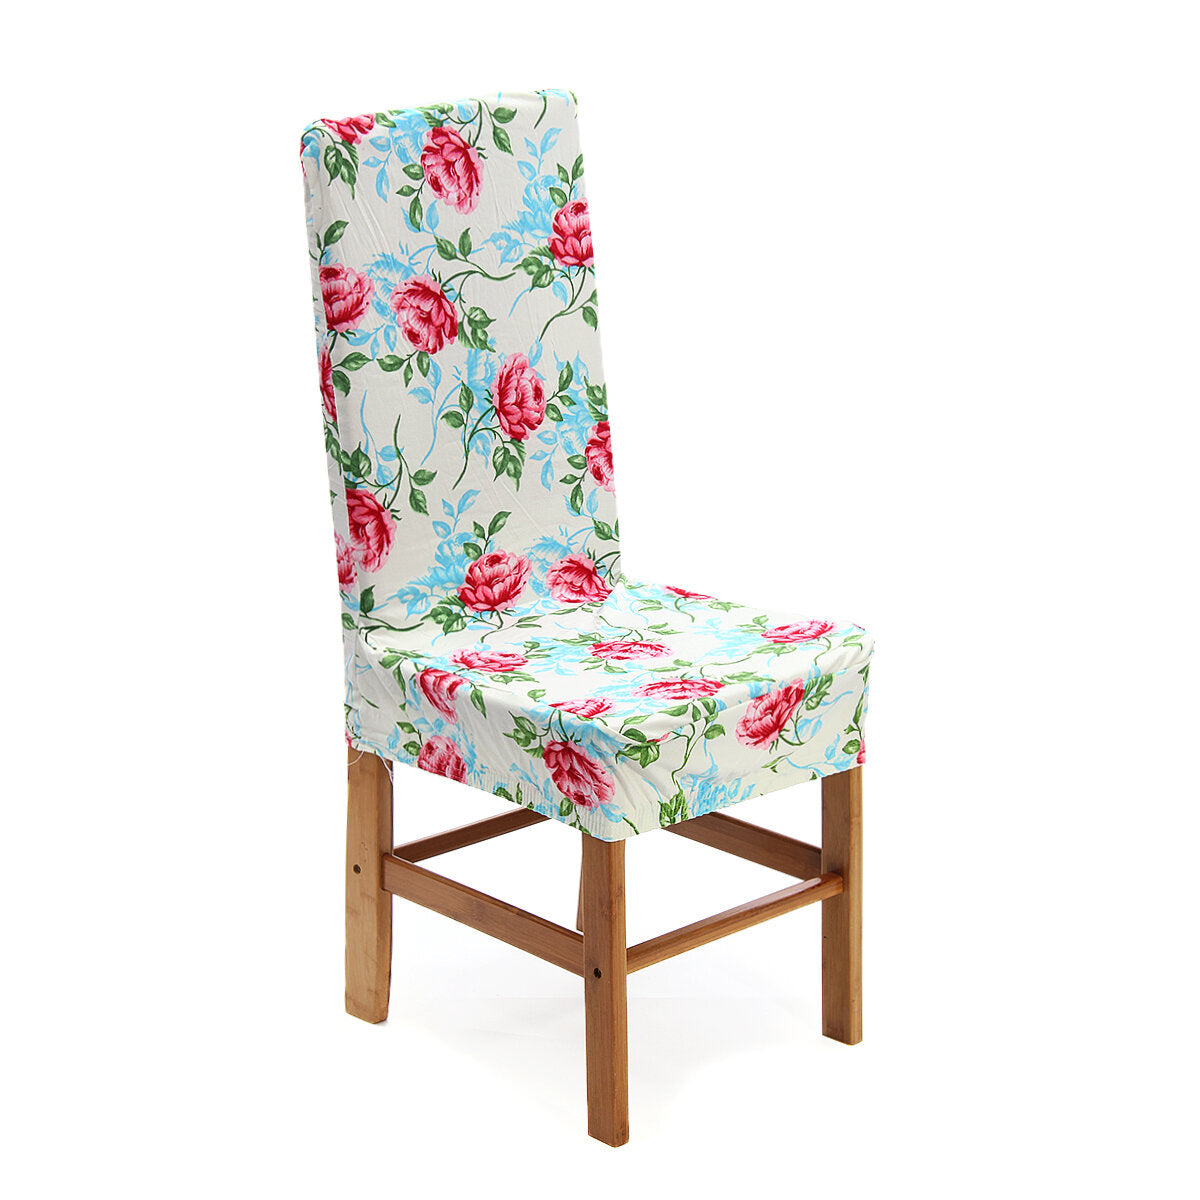 Elastic Dining Chair Cover Flowers Stretch Chair Seat Slipcover Office Computer Chair Protector Home Office Furniture Decor